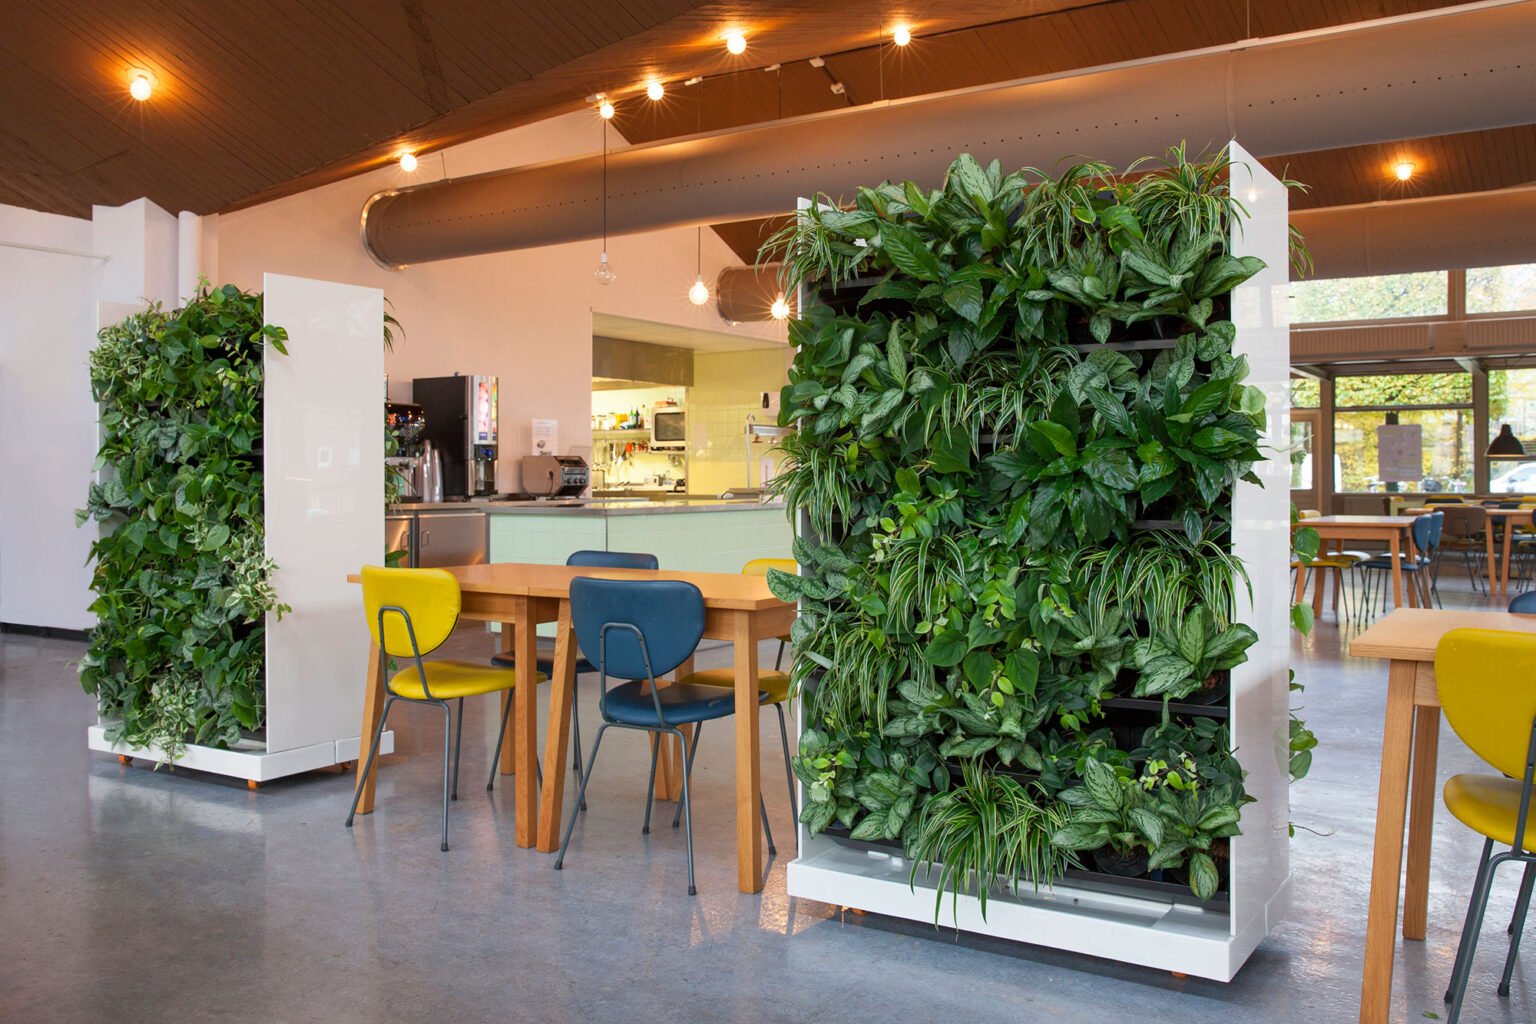 2 Mobile Greenwall As Room Divider 1536x1024 